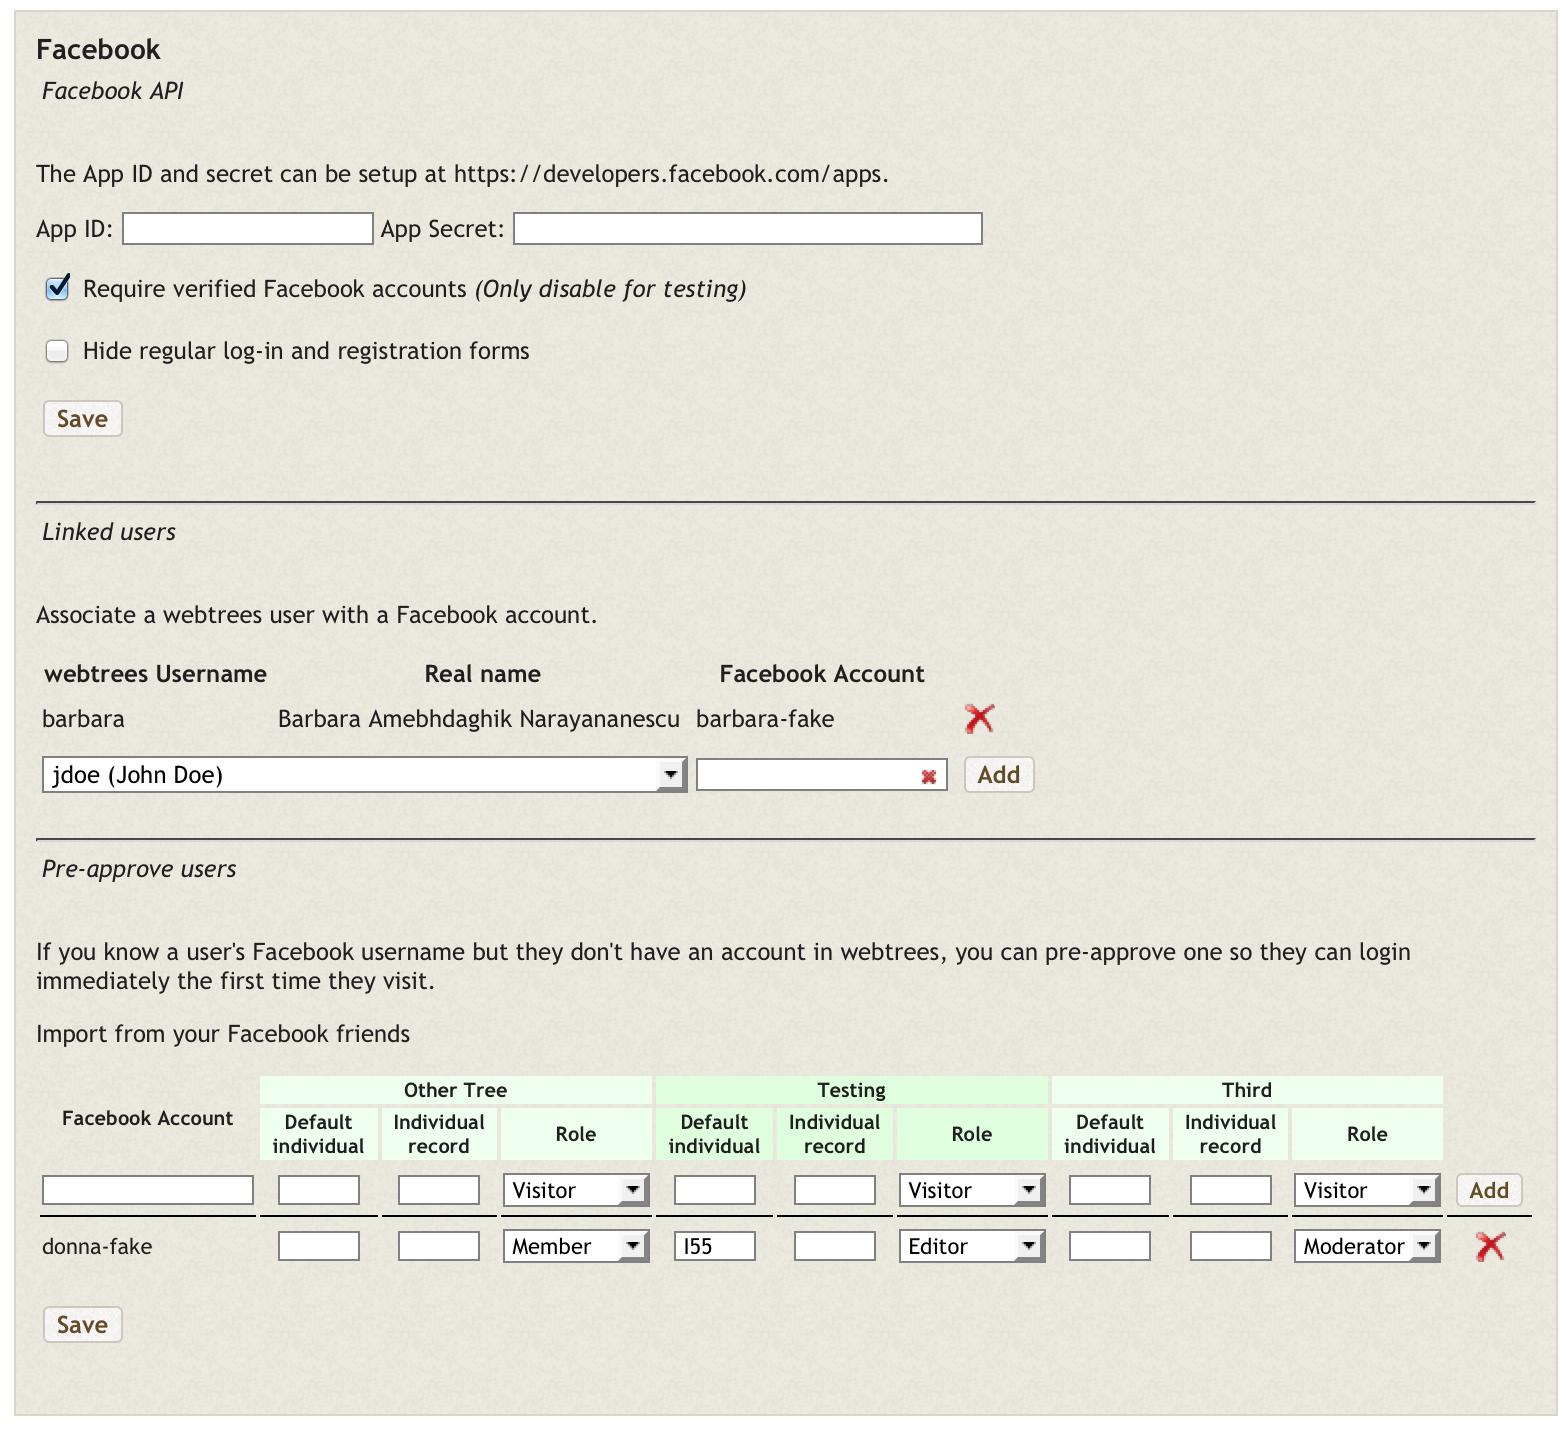 Screenshot of the configuration page